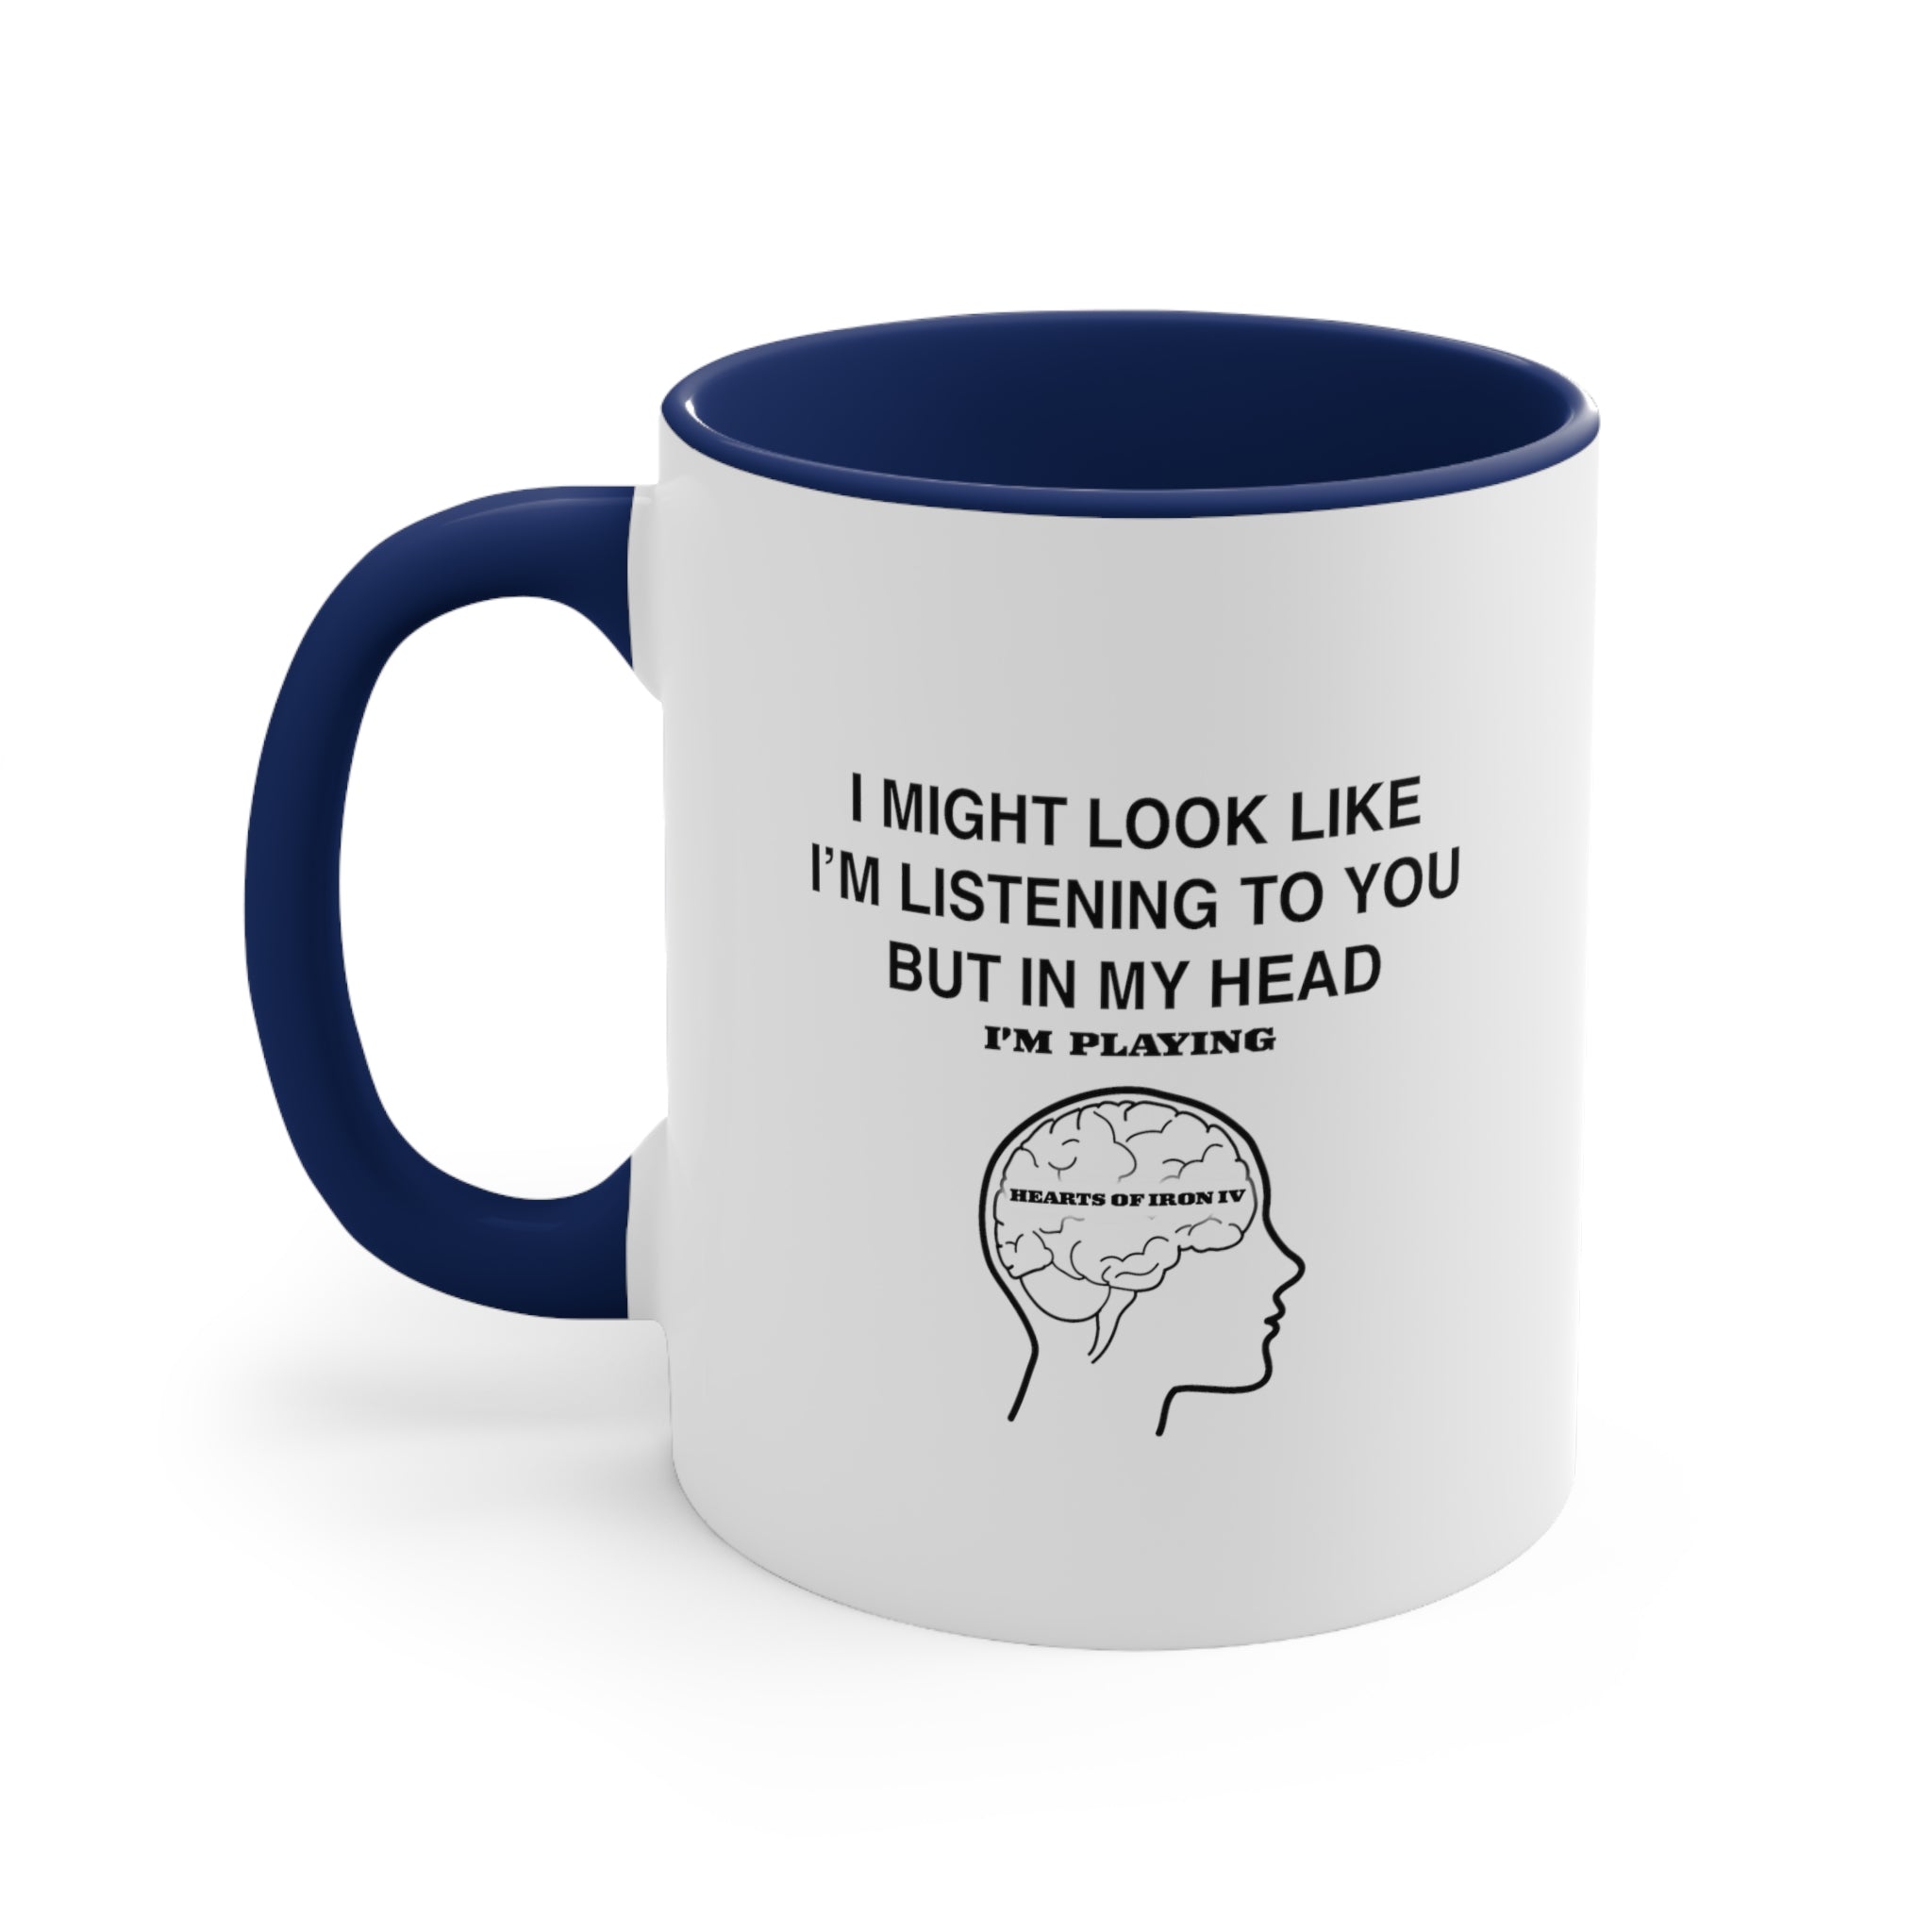 Hearts Of Iron IV 4 Coffee Mug, 11oz I Might Look Like I'm Listening Cups Mugs Cup Gamer Gift For Him Her Game Cup Cups Mugs Birthday Christmas Valentine's Anniversary Gifts